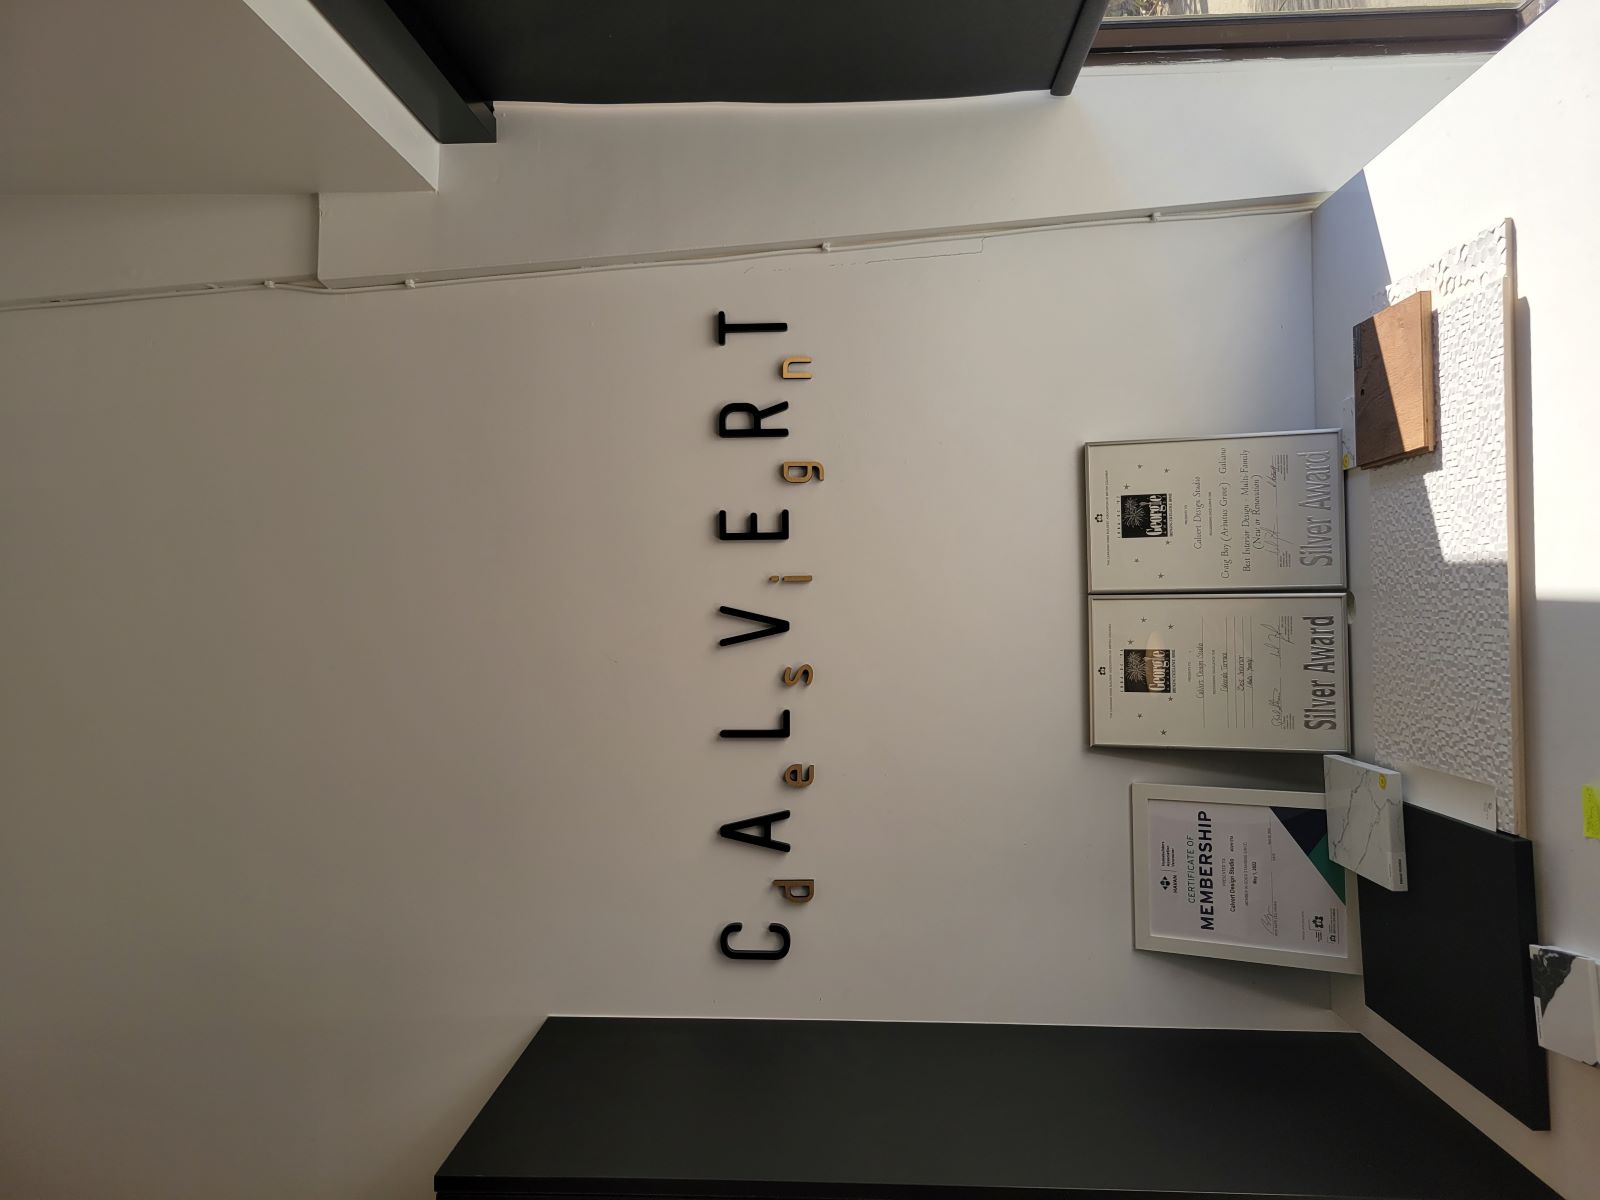 CALVERT Design Metal Office Lobby Signs in Vancouver, BC